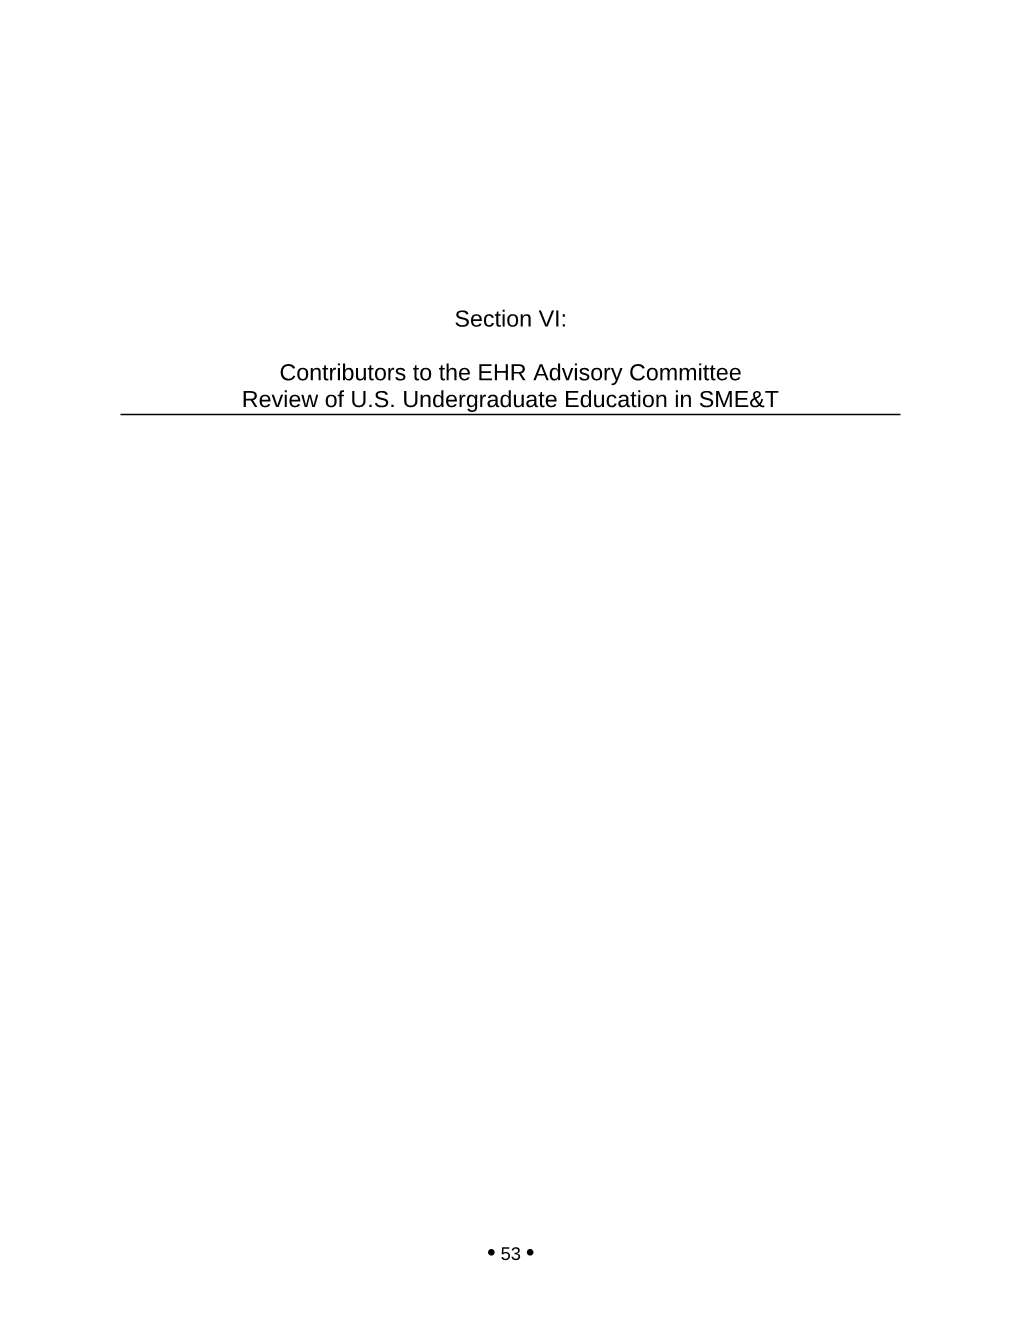 Contributors to the EHR Advisory Committee Review of U.S. Undergraduate Education in SME&T